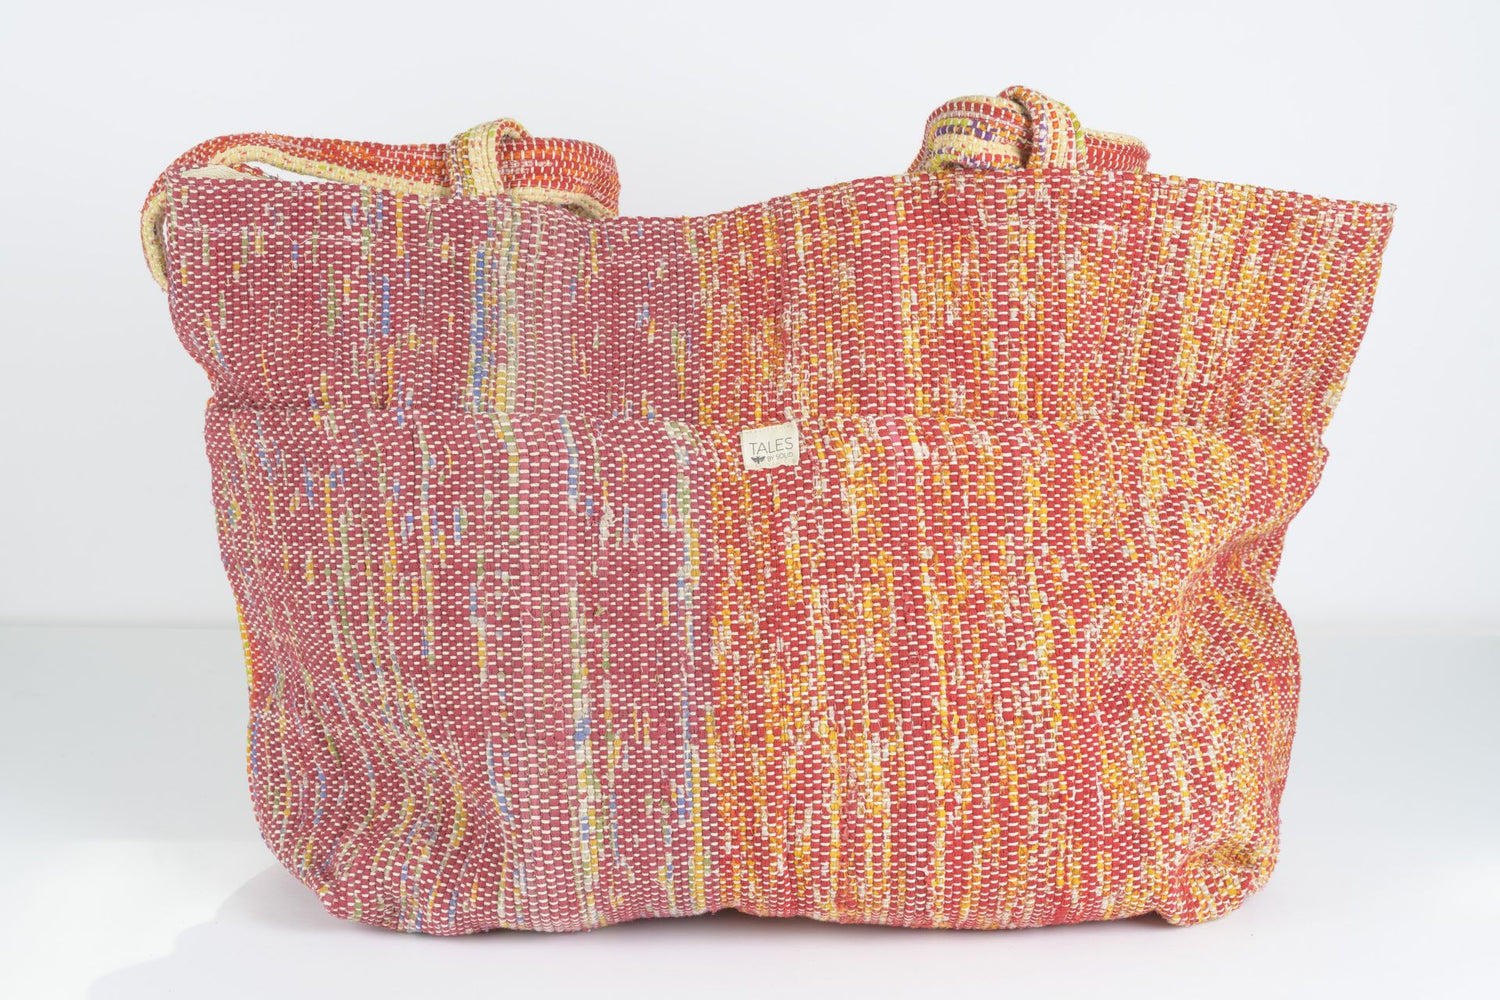 Large Sari Bag, handcrafted Elegance with a sustainable story - SB005